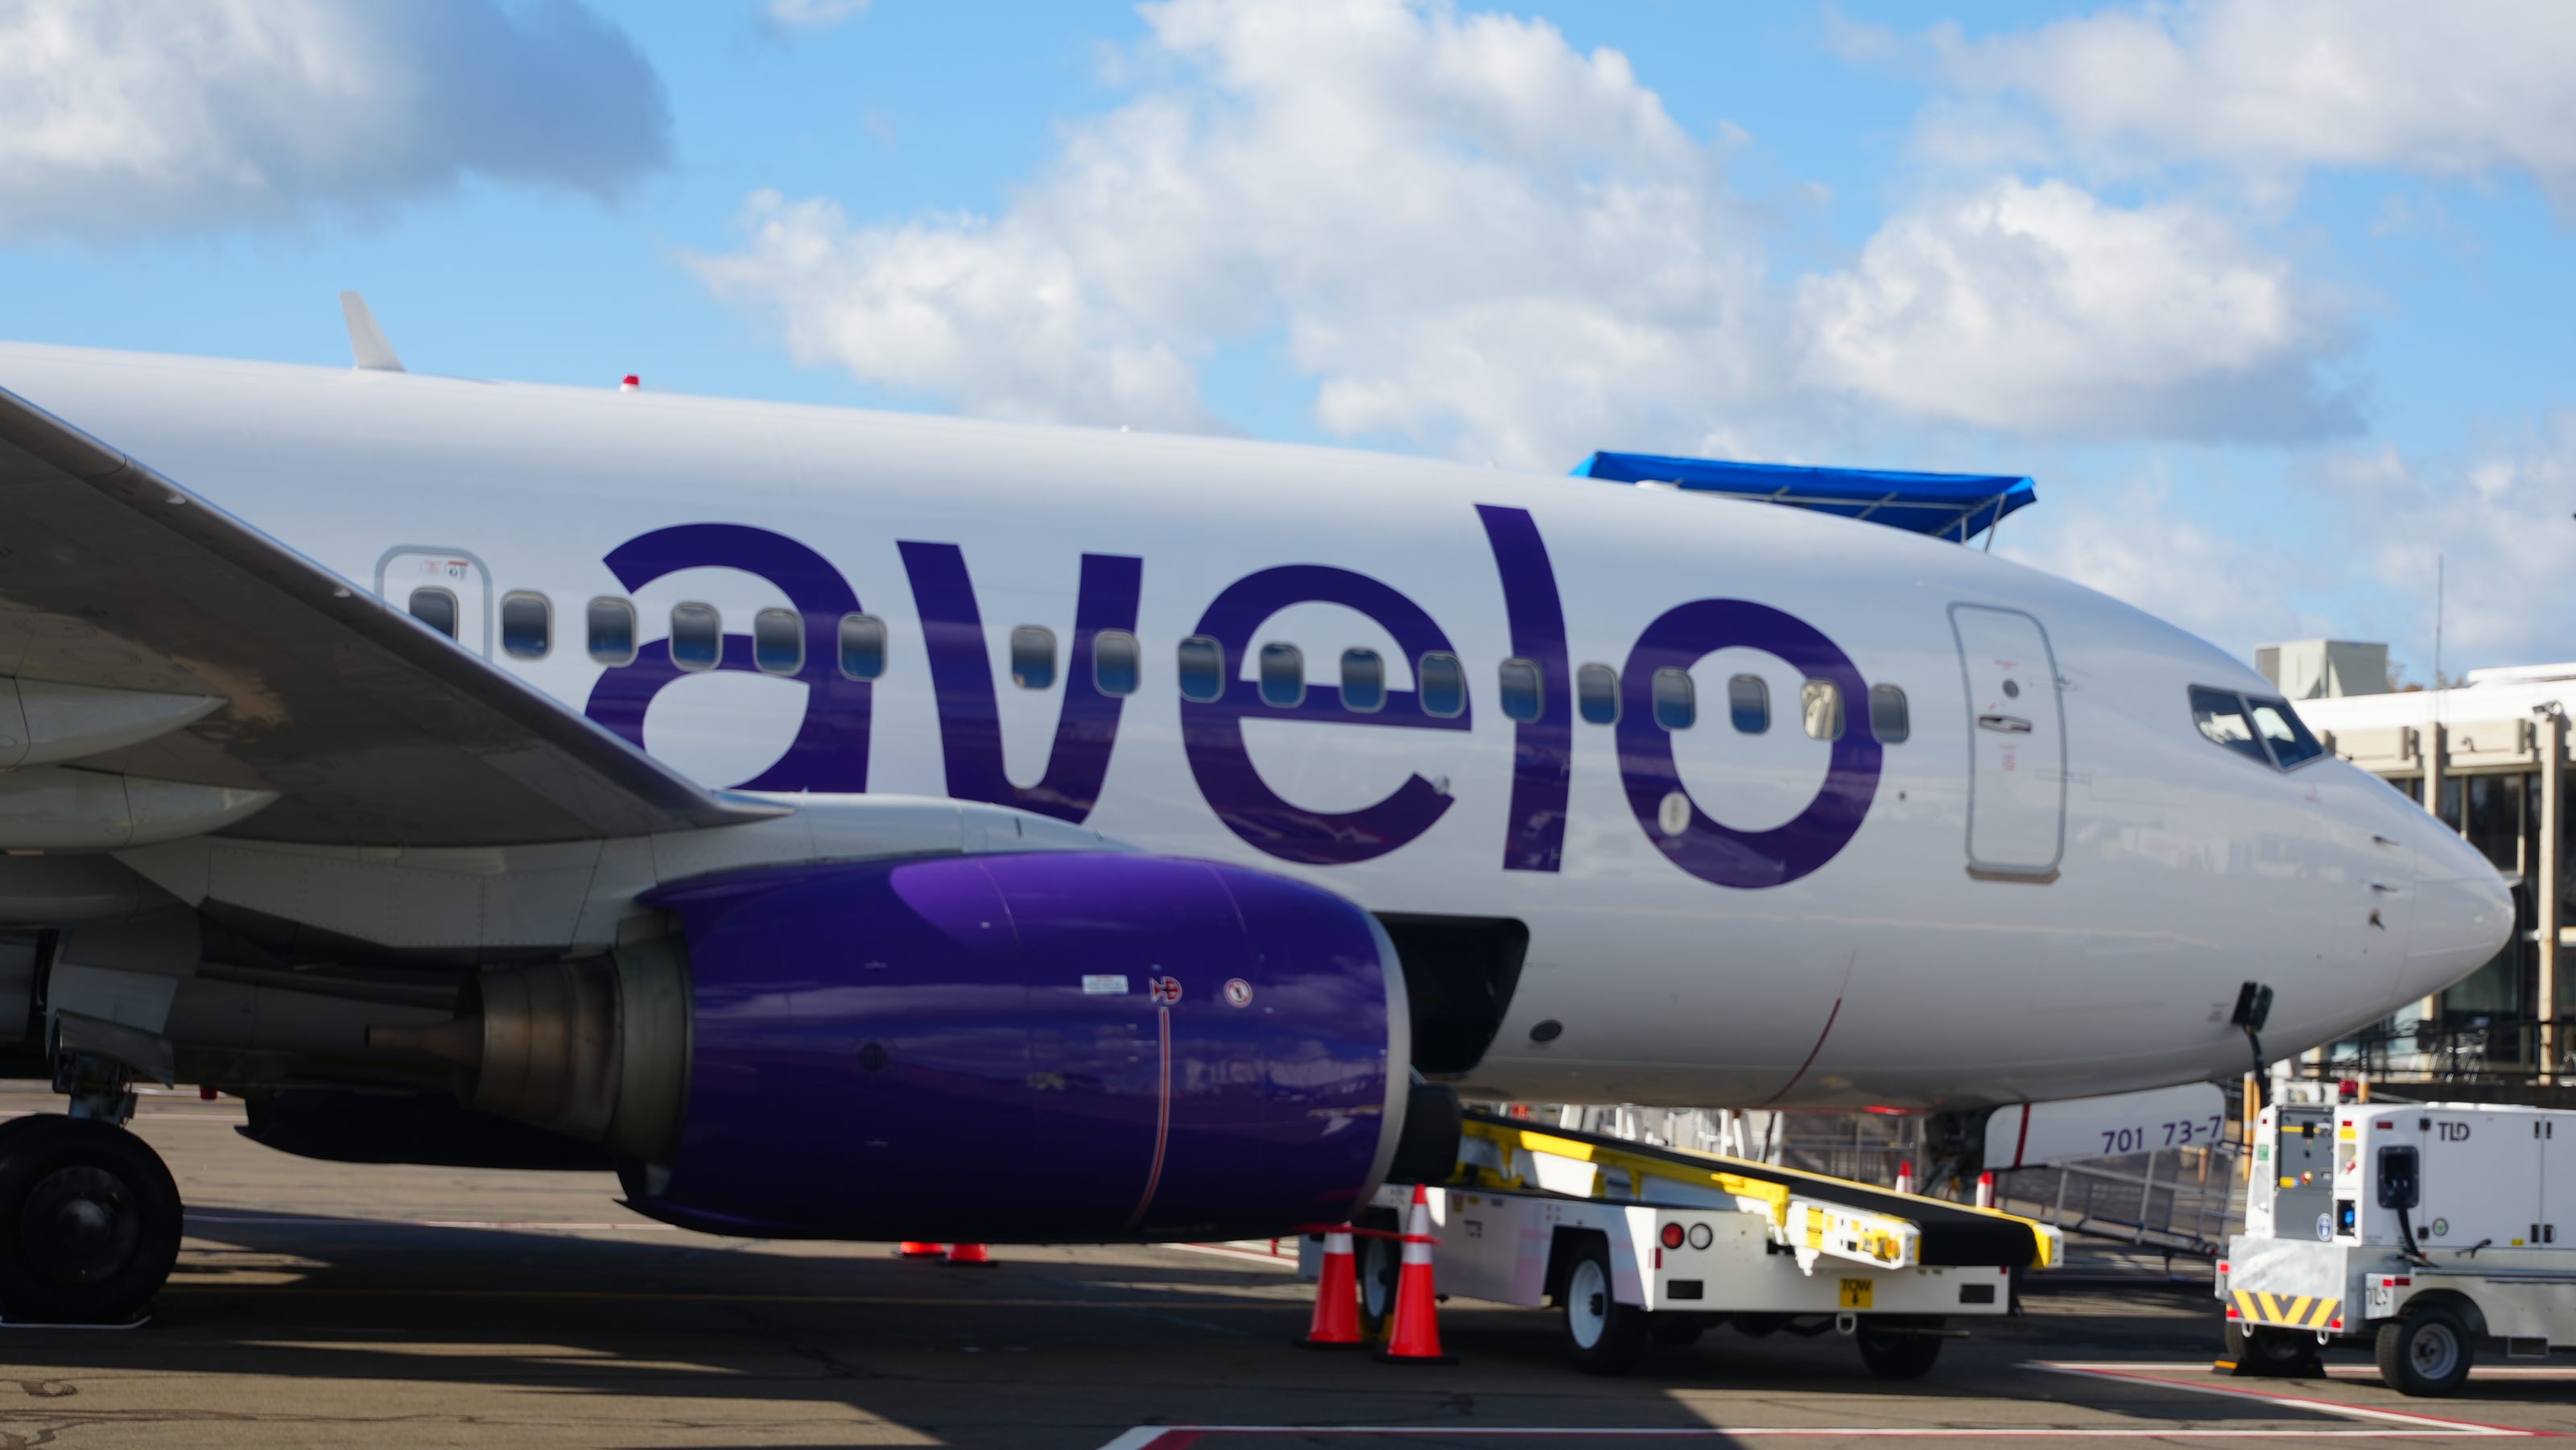  Avelo Airlines announces new nonstop flights from Melbourne airport to Conn., N.C. 